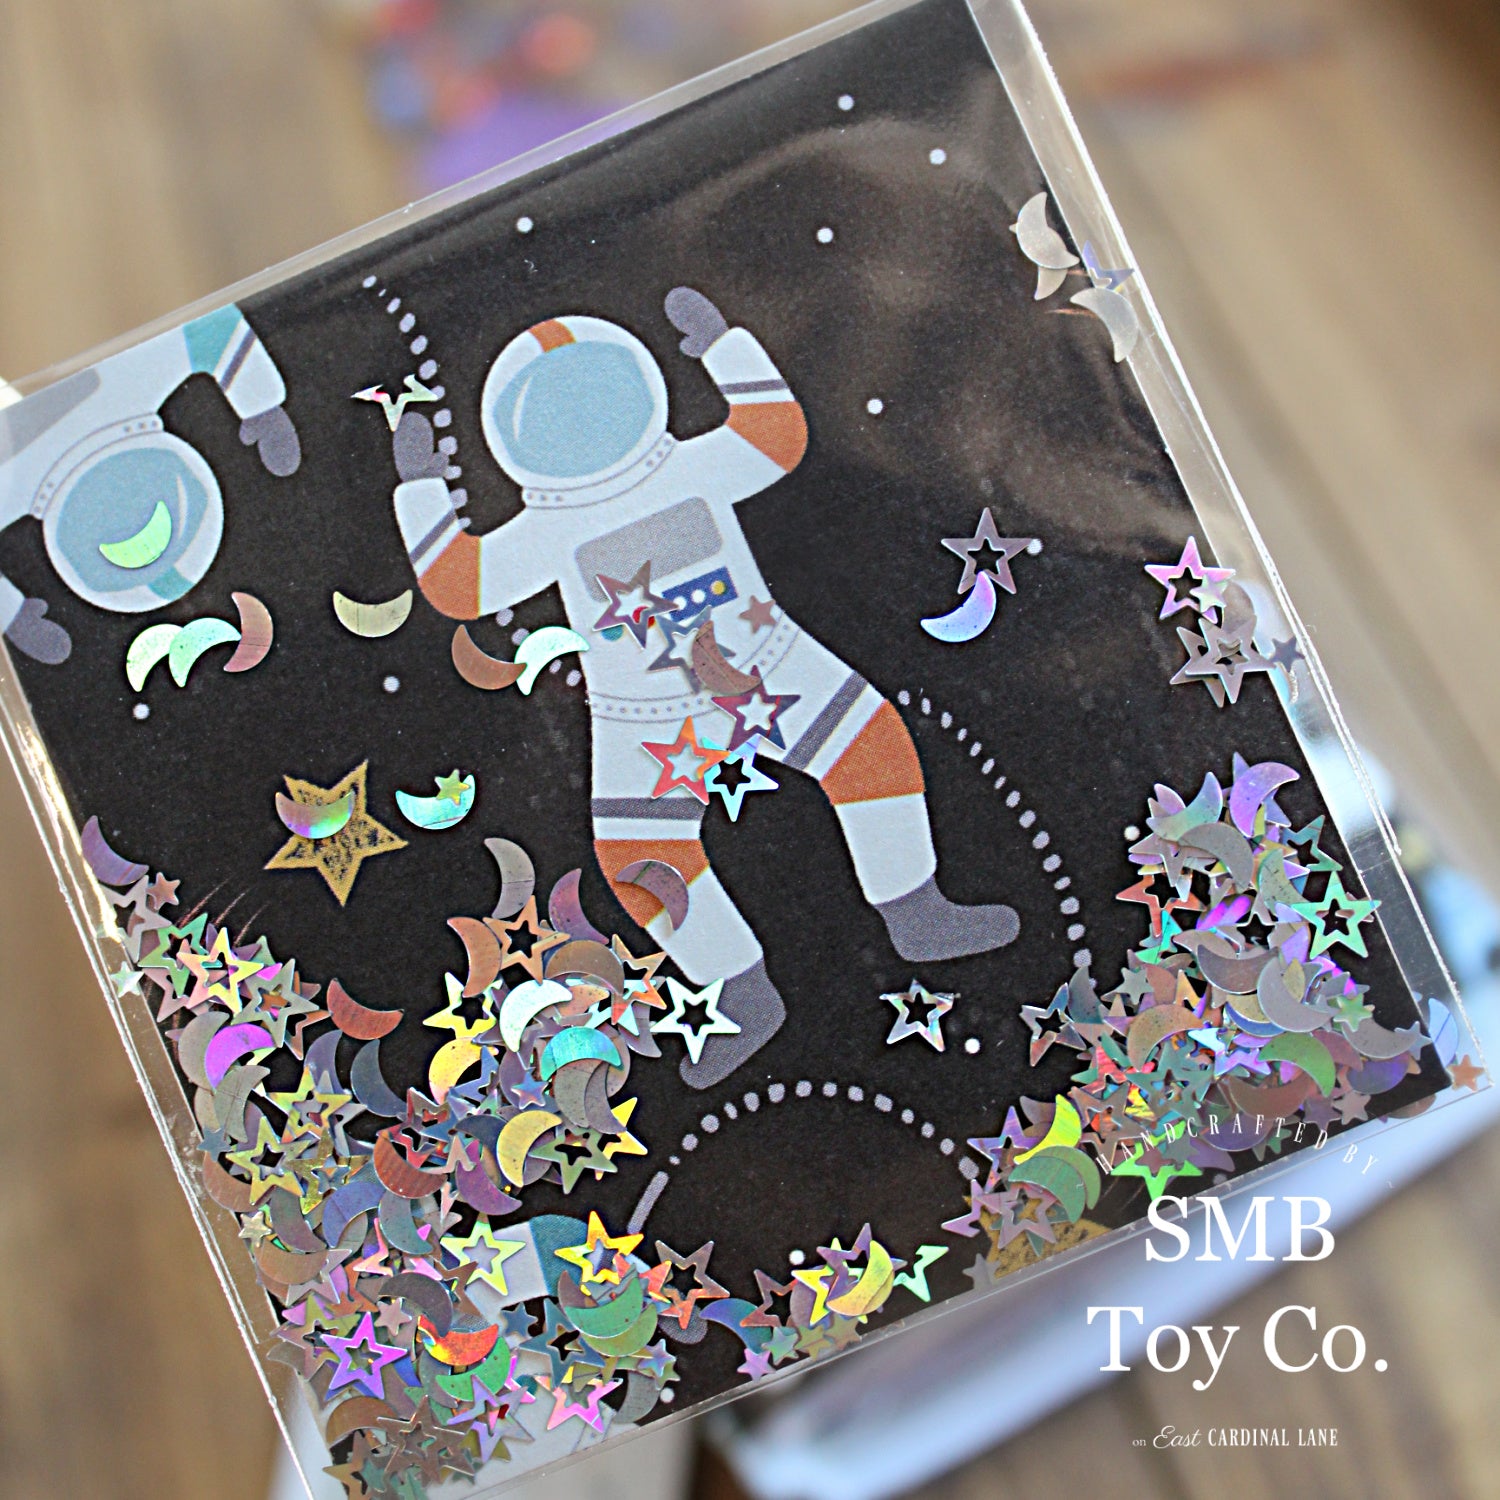 Mini Travel Journal - Astronauts in Space